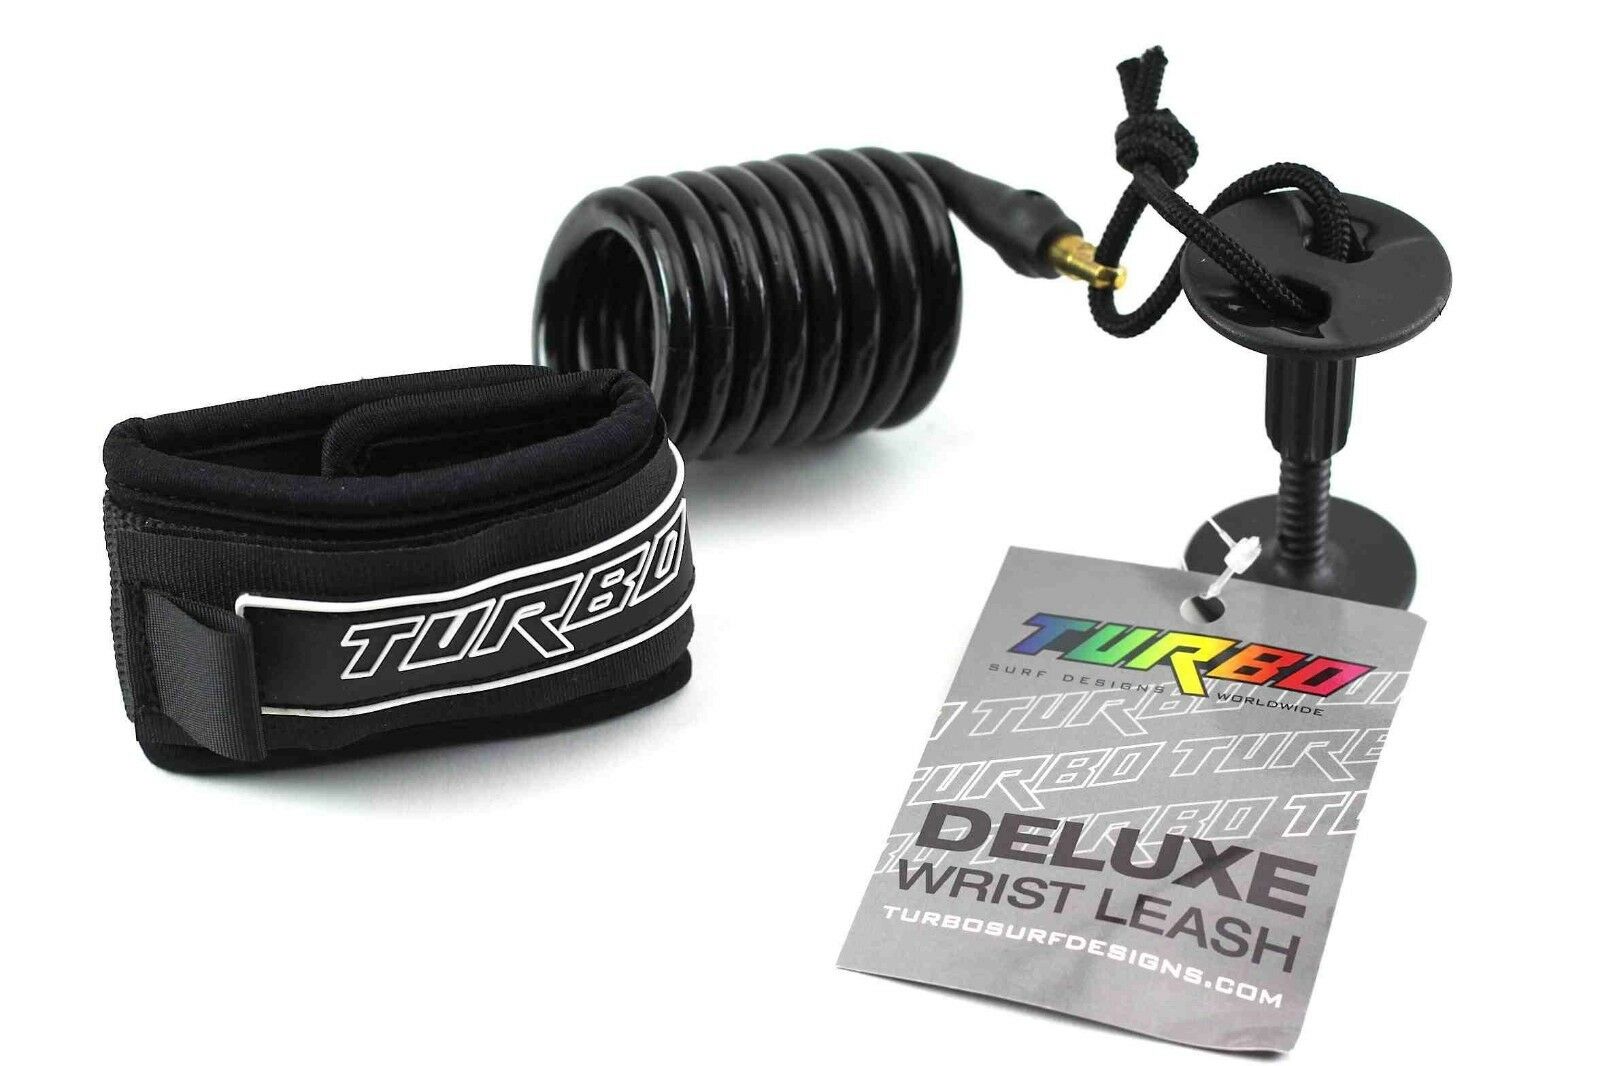 Turbo Bodyboard Deluxe Coiled Wrist Leash With Plug And String Bodyboarding